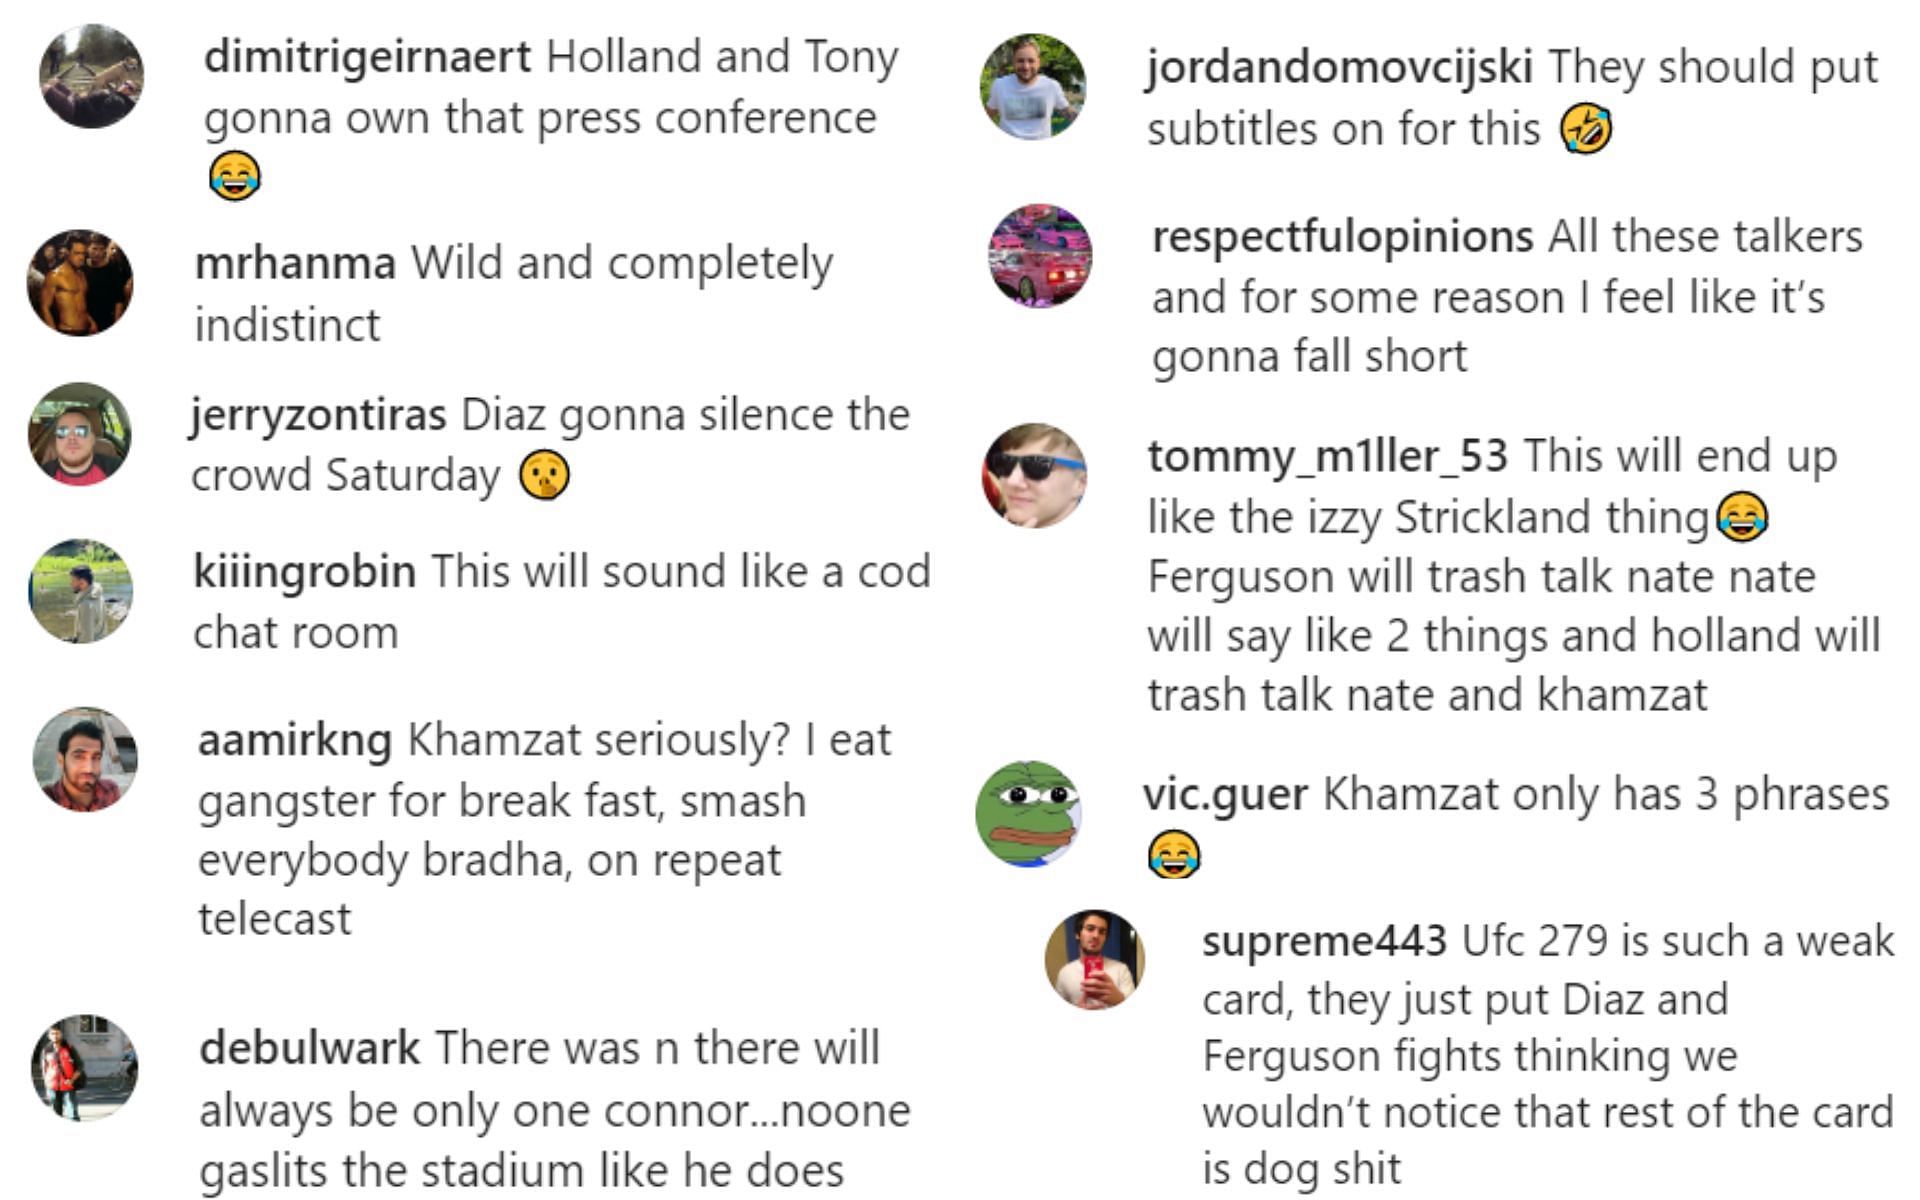 Fans react to the UFC 279 press conference featuring Chimaev, Diaz, Ferguson and Holland.